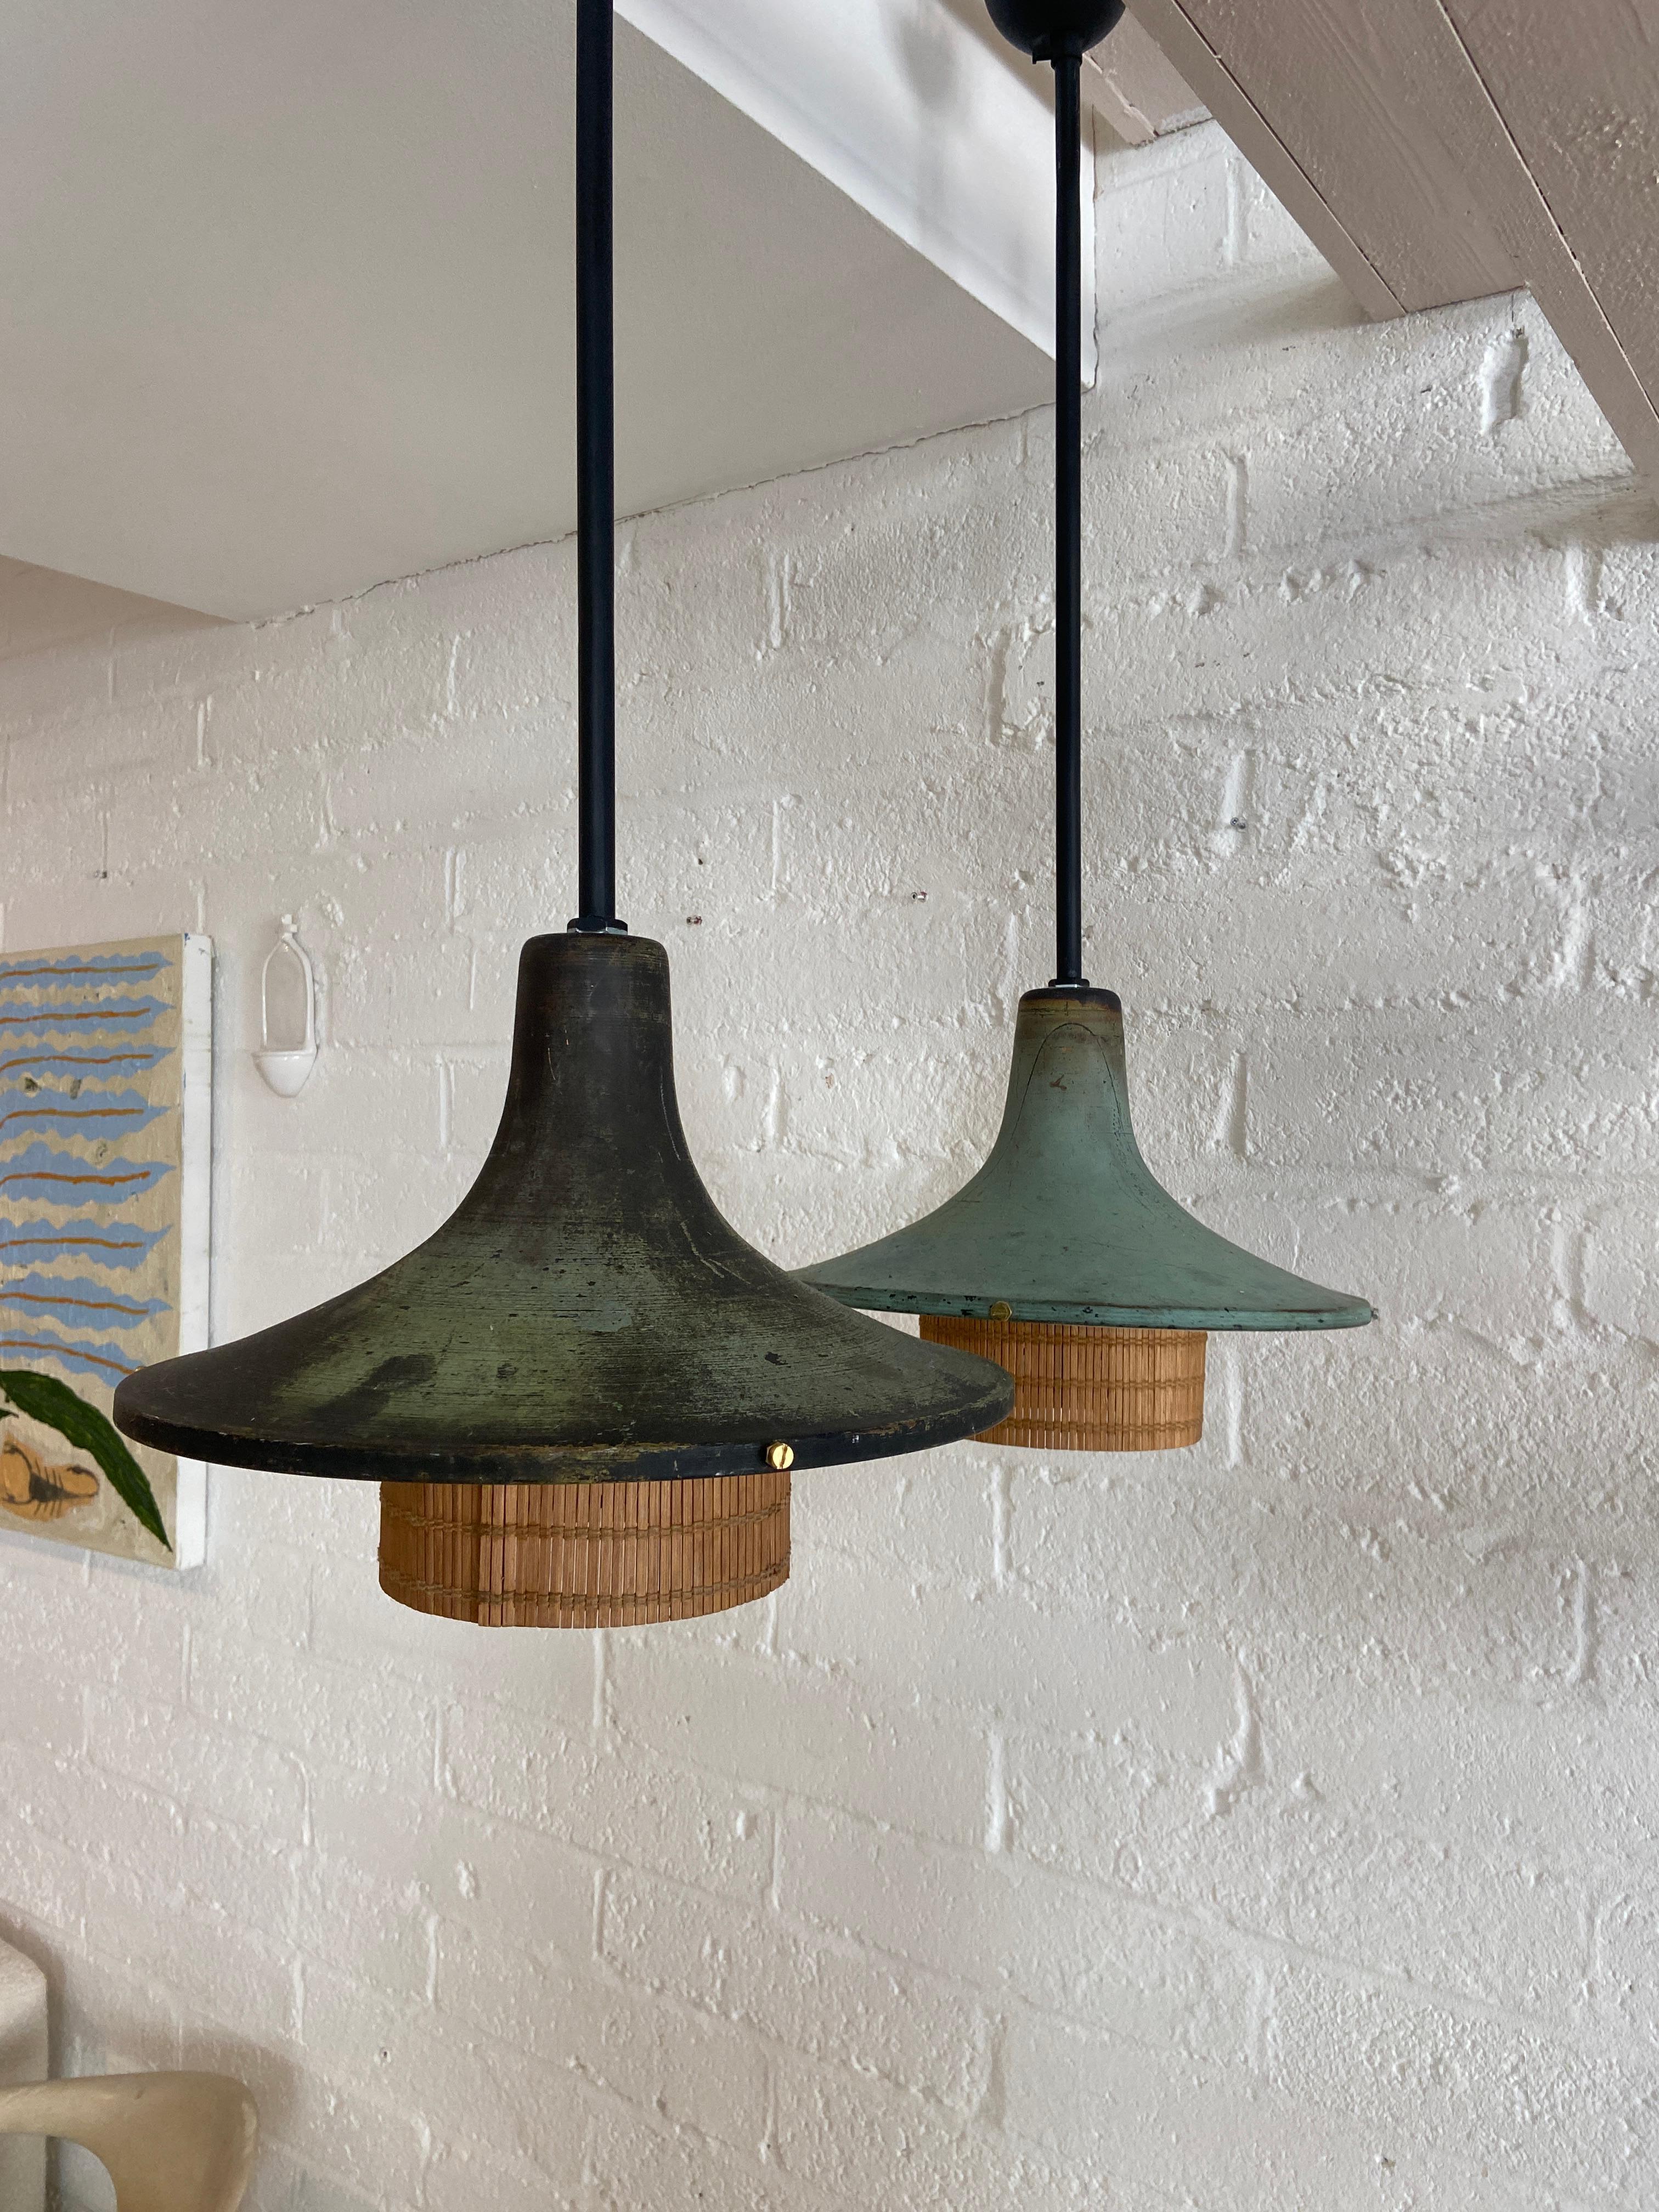 A stunning pair of pendant lights crafted from copper and rattan. Each pendant showcases a unique and captivating verdigris patina, with one displaying a slightly more aged appearance than the other, adding to their character and charm. The